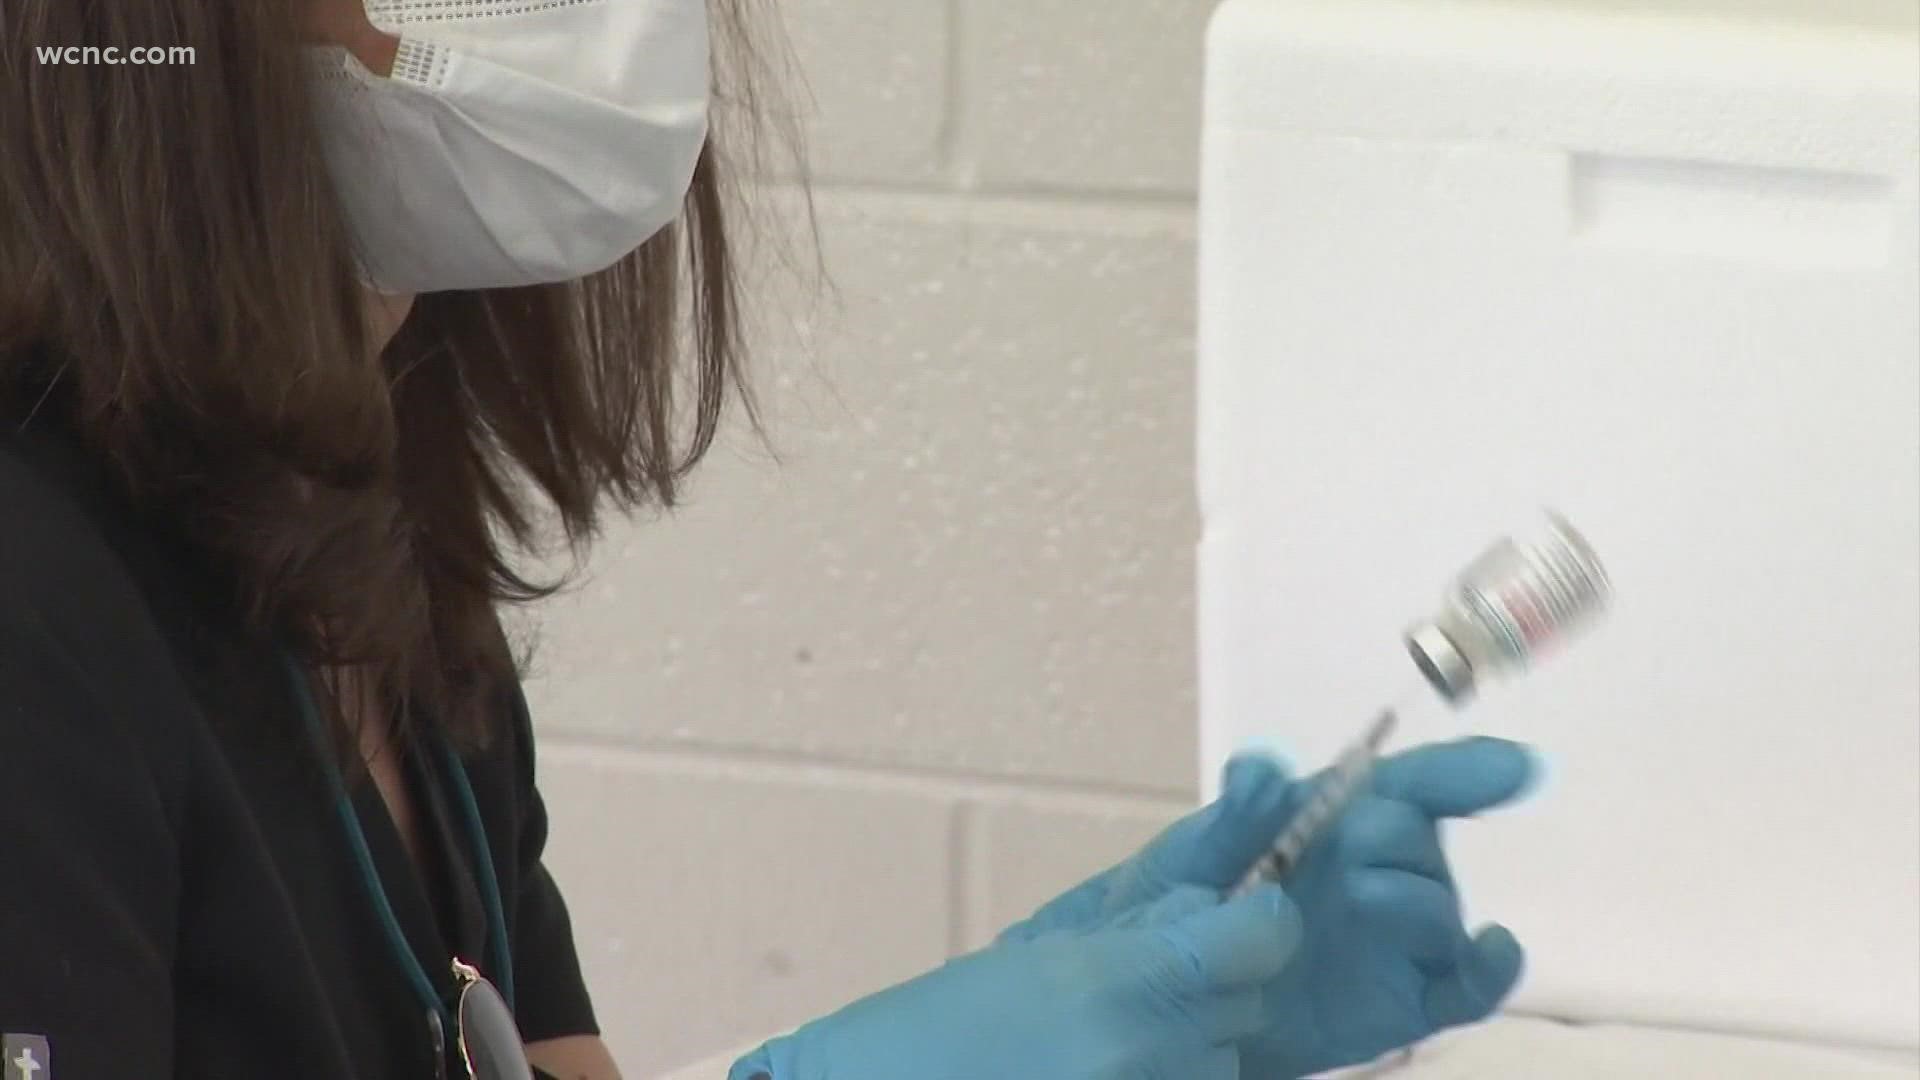 New employees that work for the City of Charlotte are now required to be vaccinated.